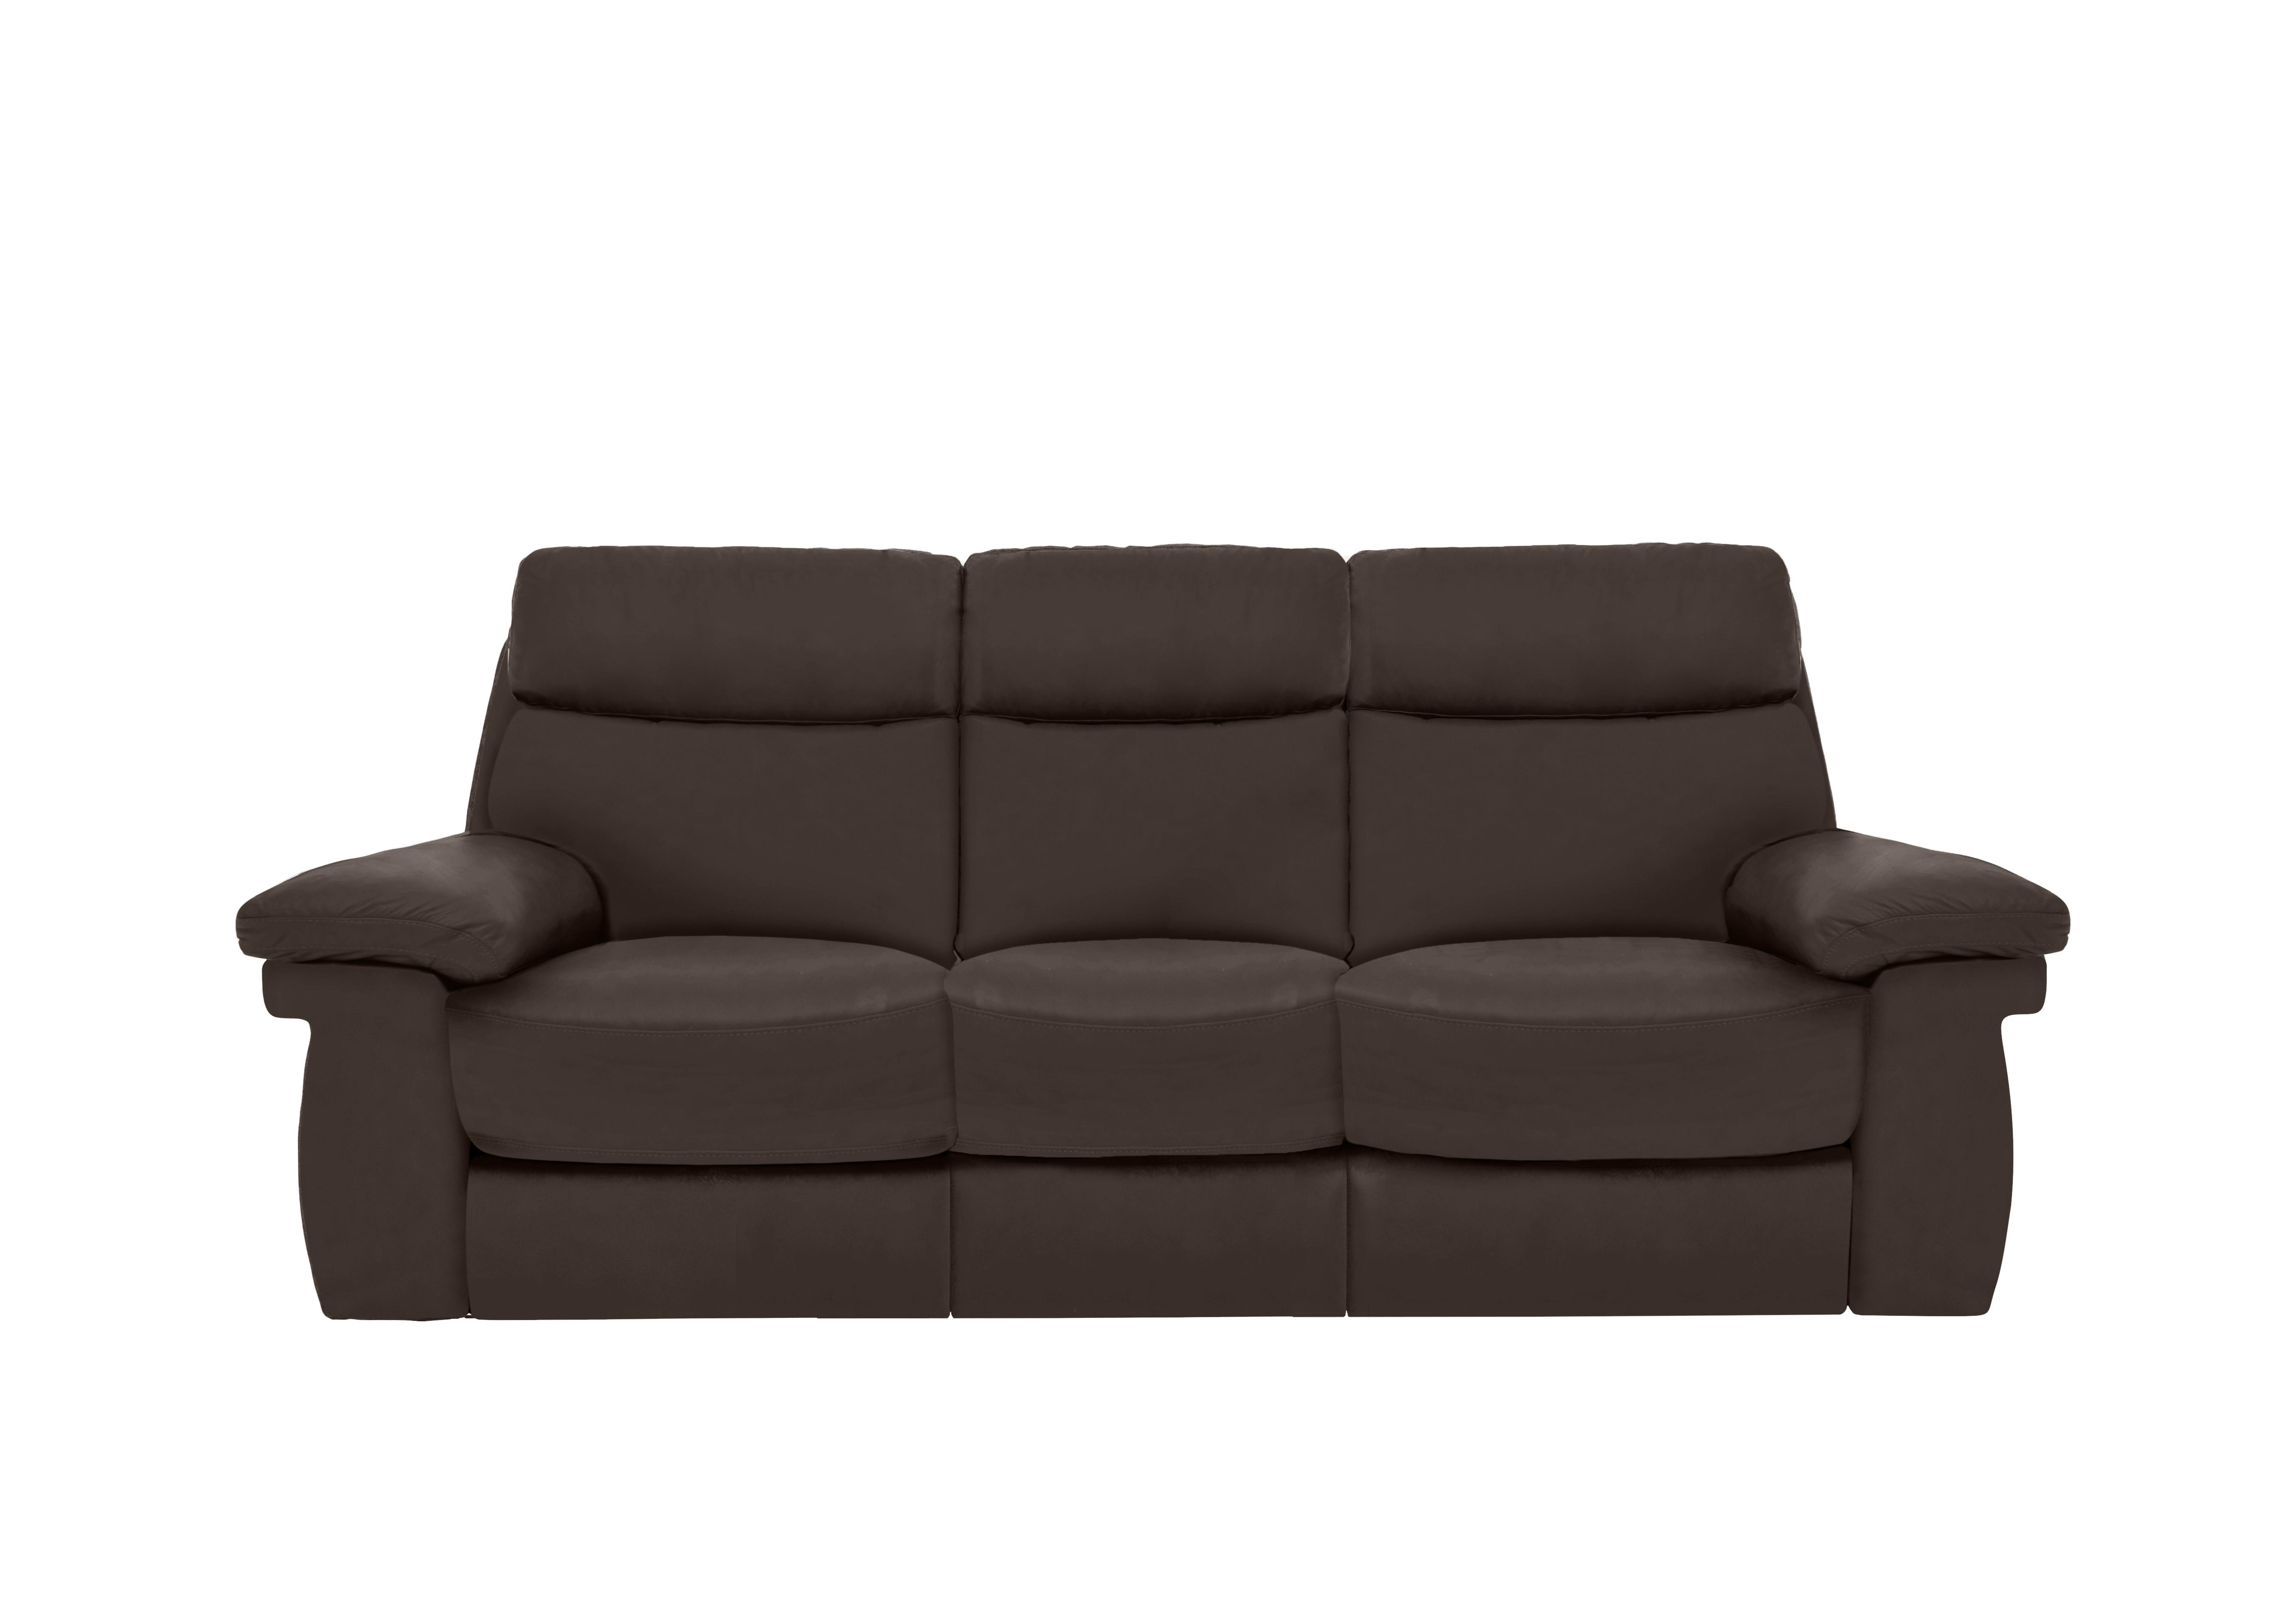 Serene 3 Seater Leather Power Recliner Sofa with Power Headrests in Bx-037c Walnut on Furniture Village